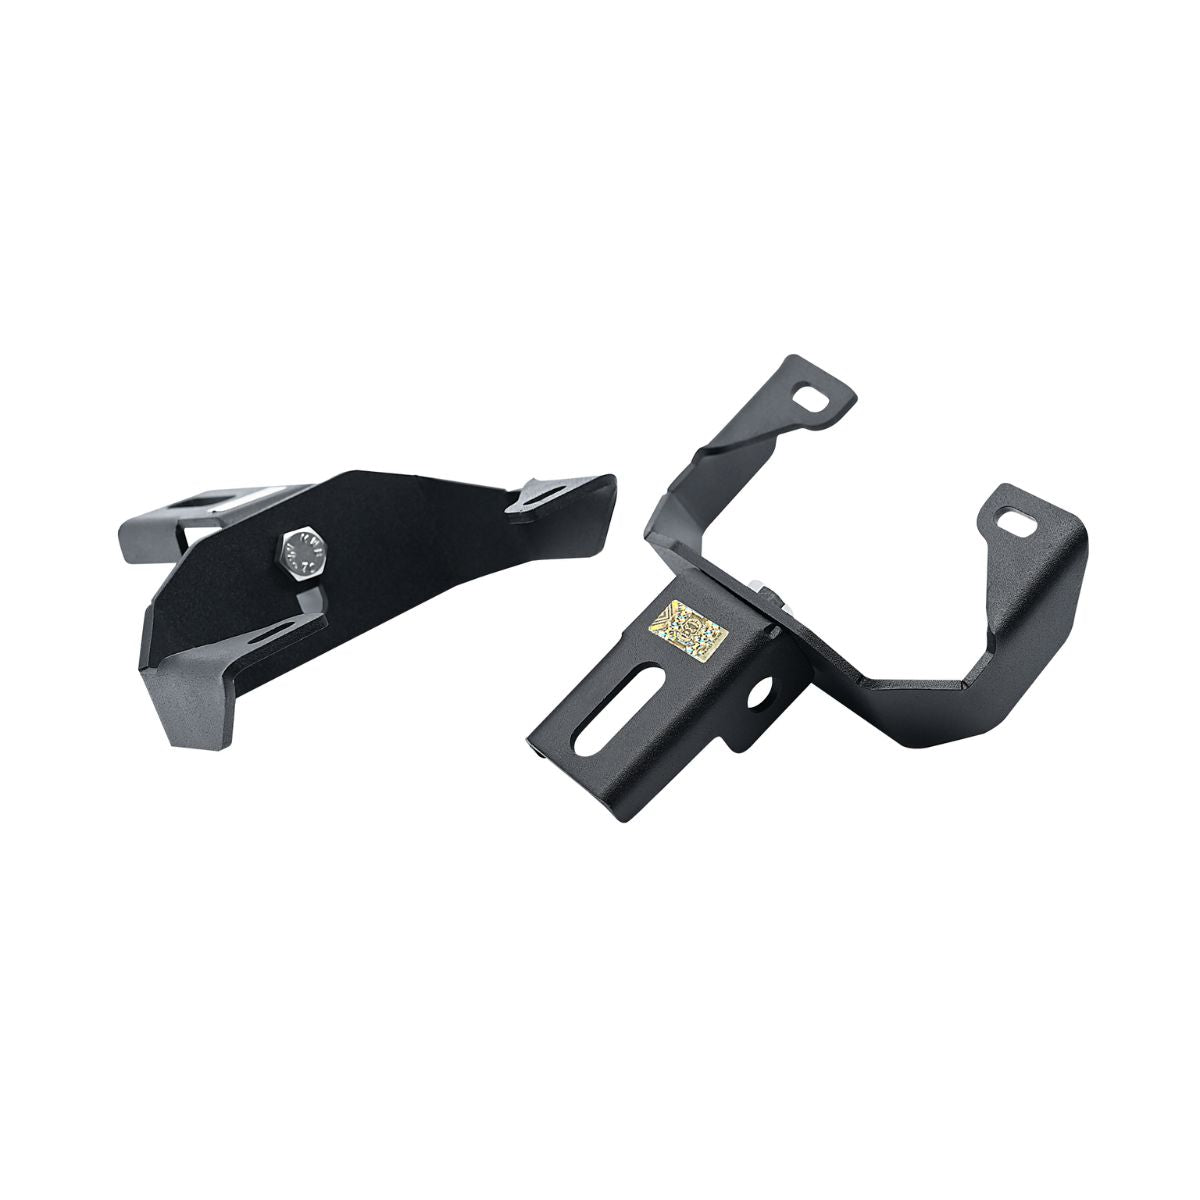 Fork Clamps for Hero Xpulse 200 4